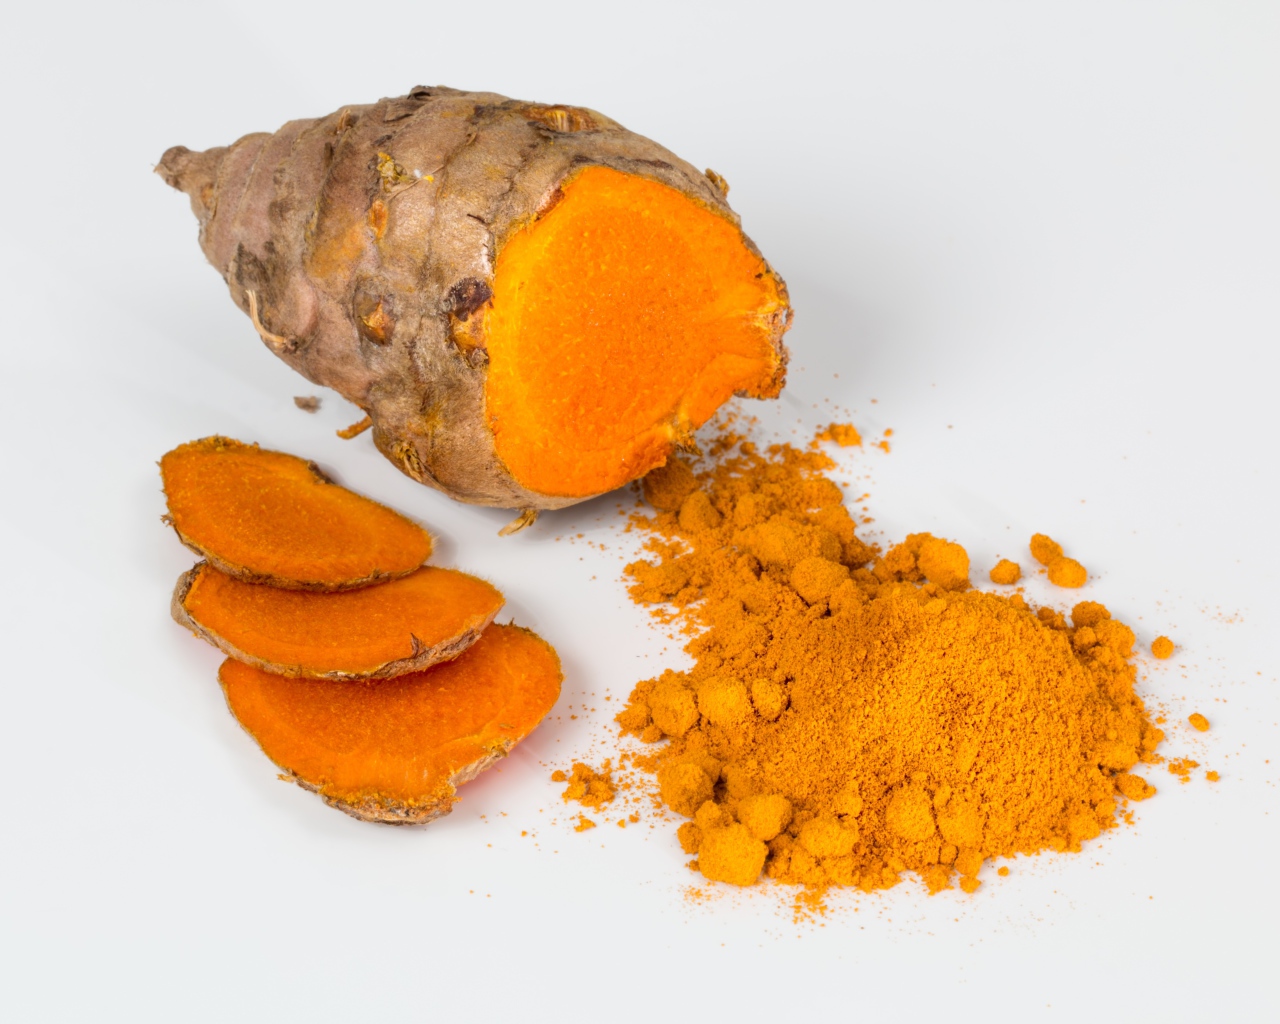 Turmeric root on gray background